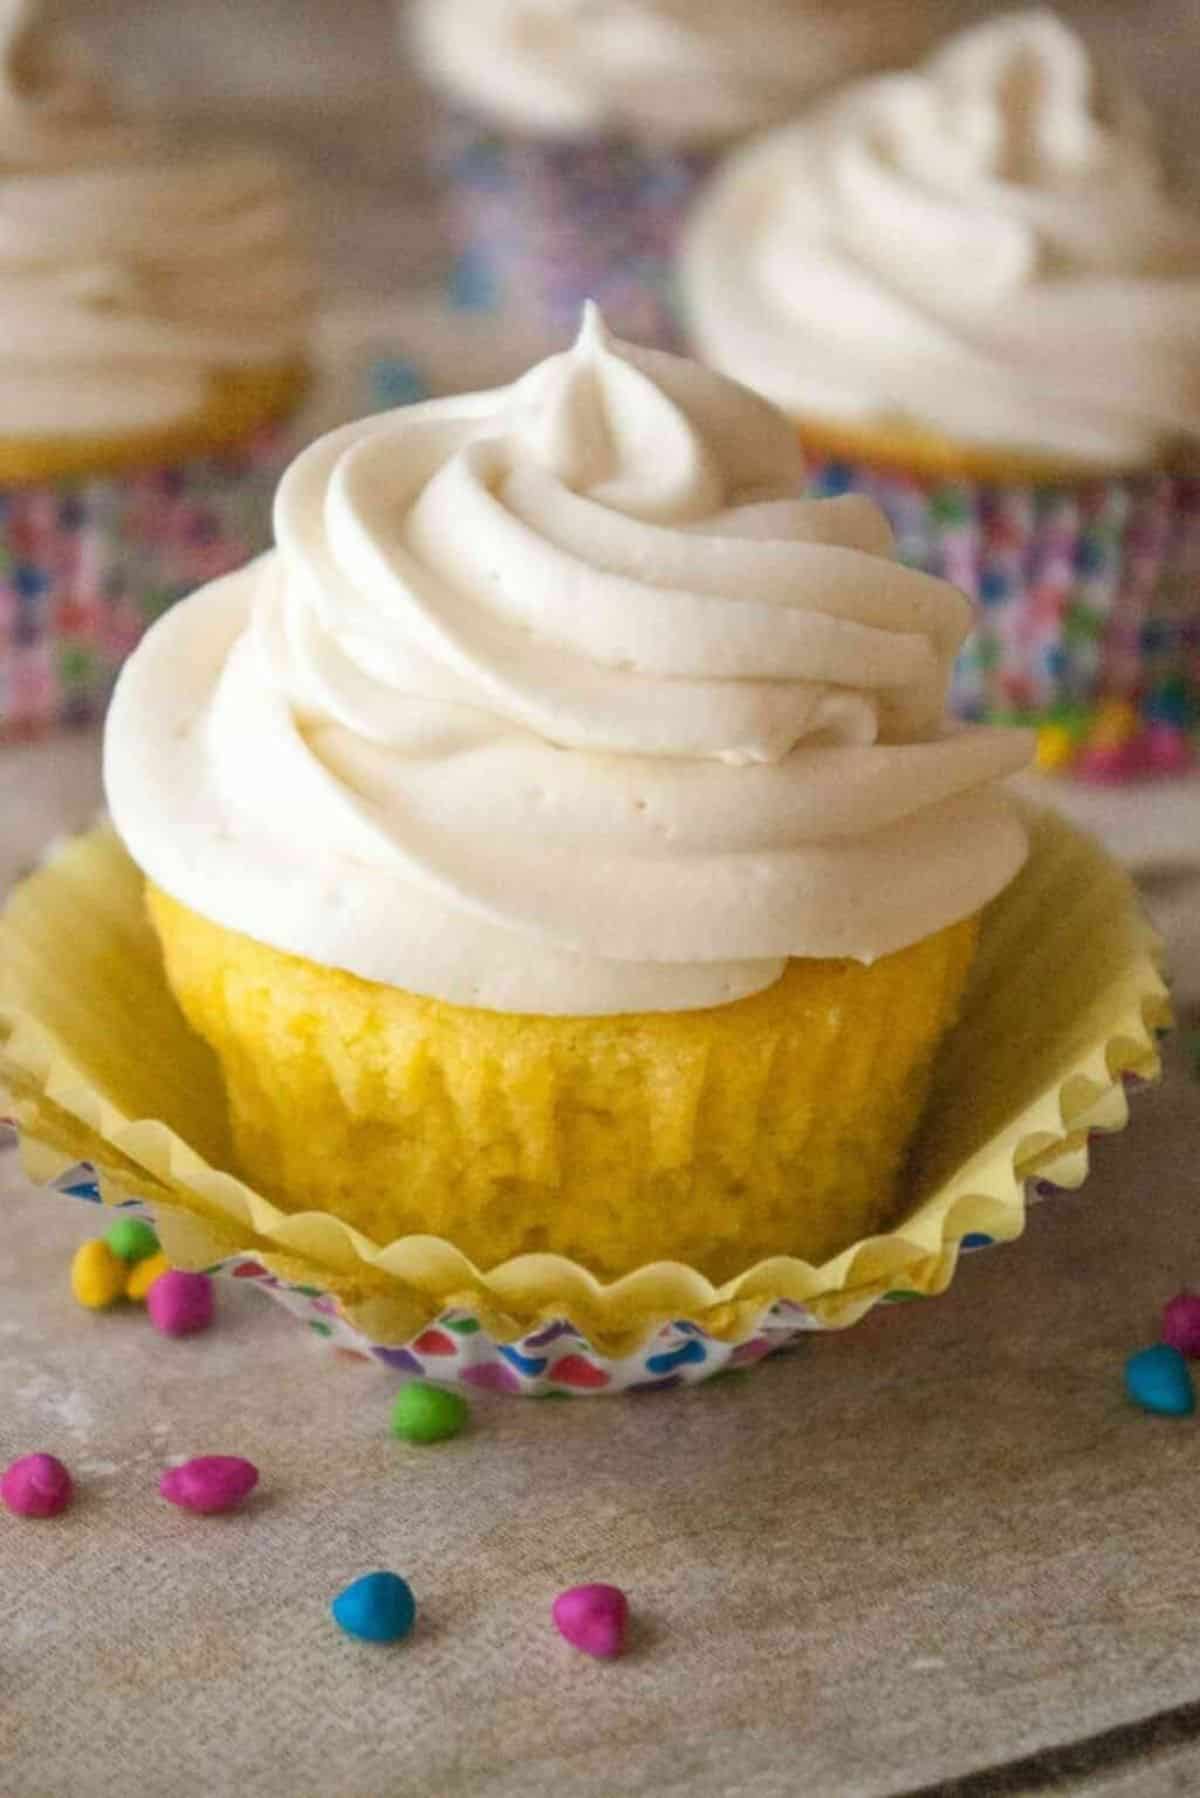 A cupcake with Whipped Cream Cheese Frosting.